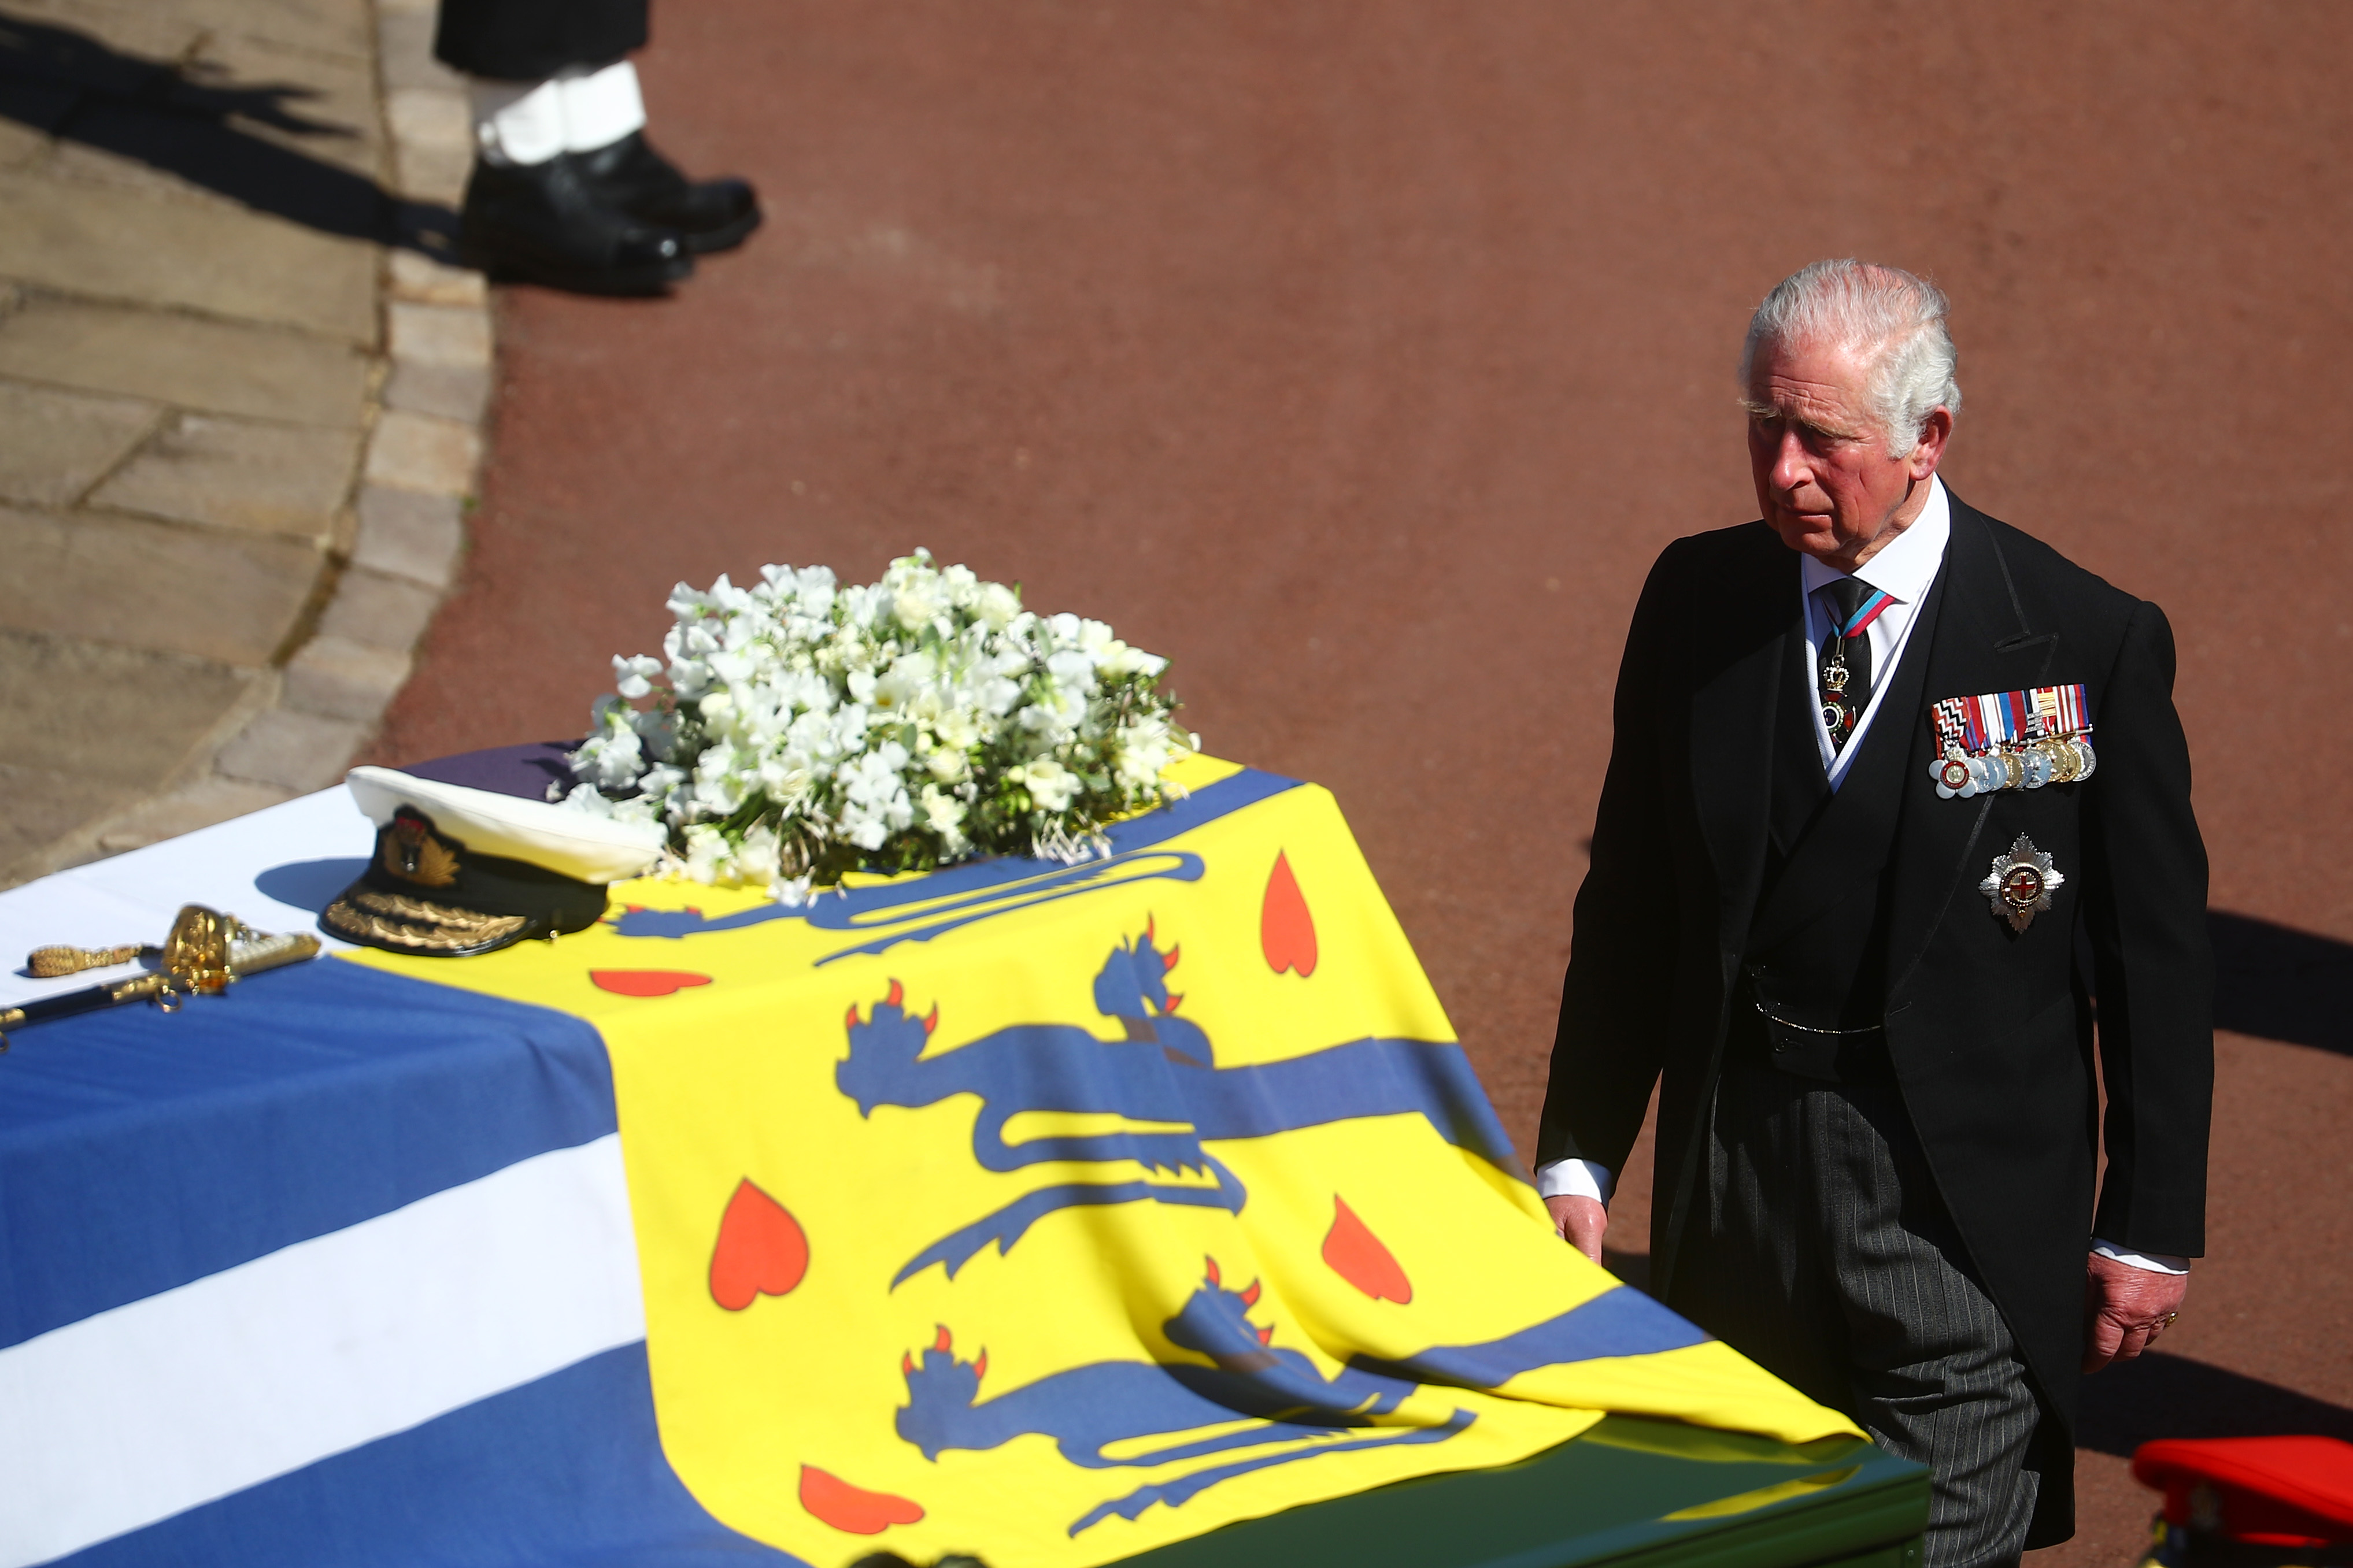 Prince Charles walks behind Prince Philip's coffin, covered with His Royal Highness’s Personal Standard, during Duke of Edinburgh's funeral